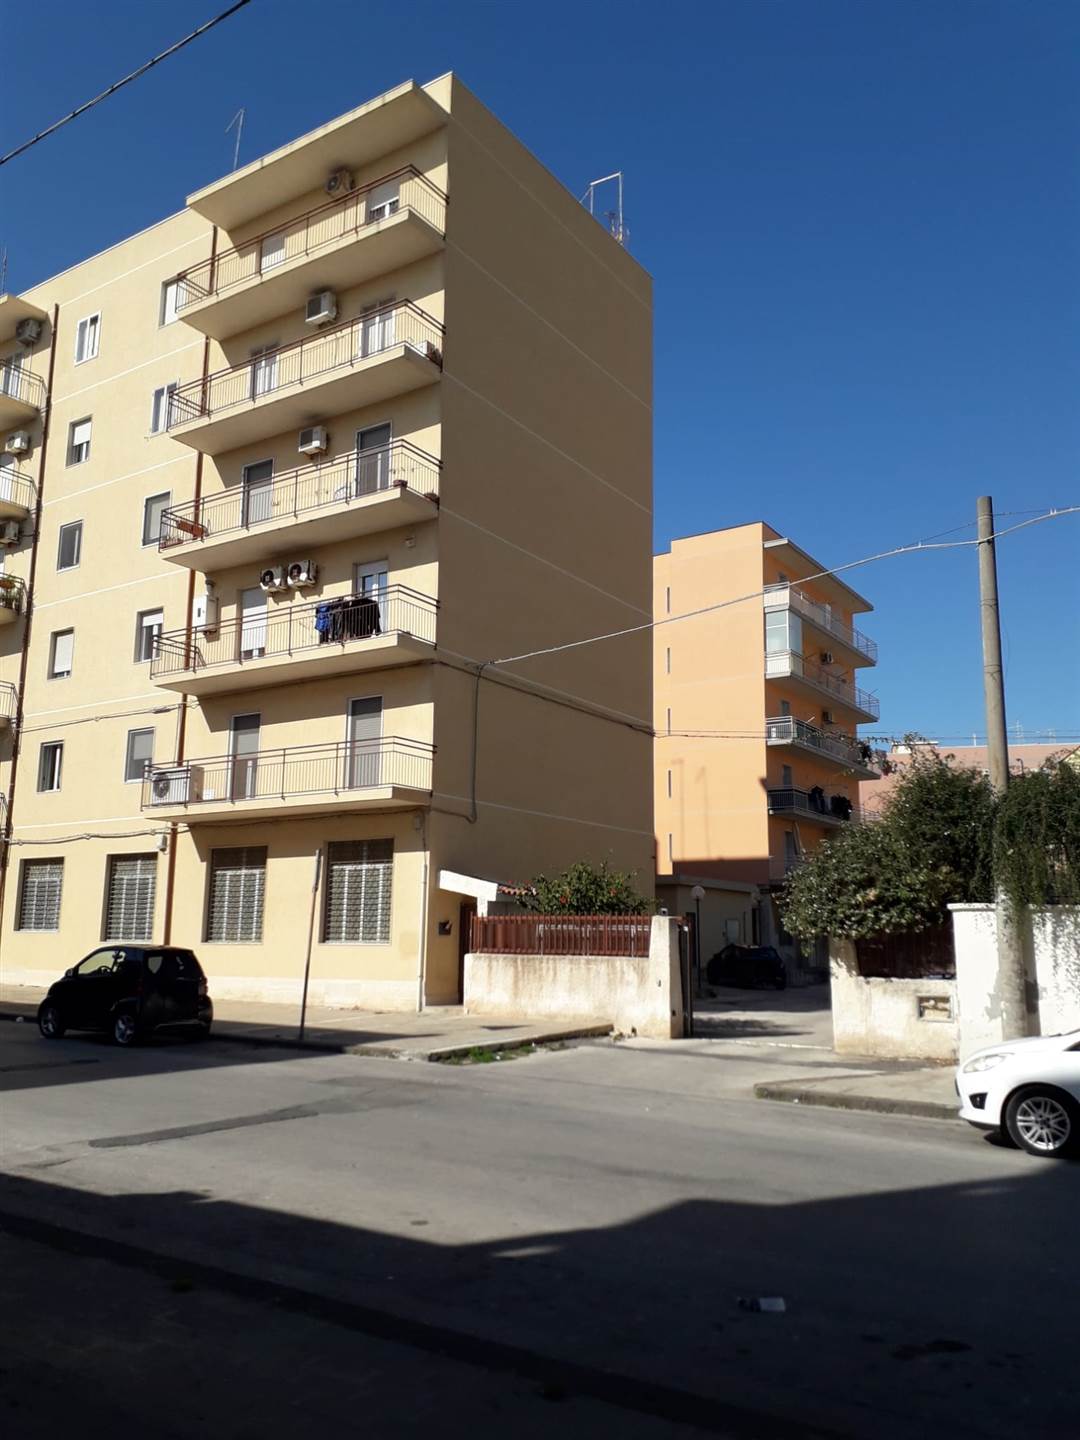 In a fenced condominium, we have an apartment of 127 square meters, located on the fourth floor and composed of: entrance hall, living room, two 